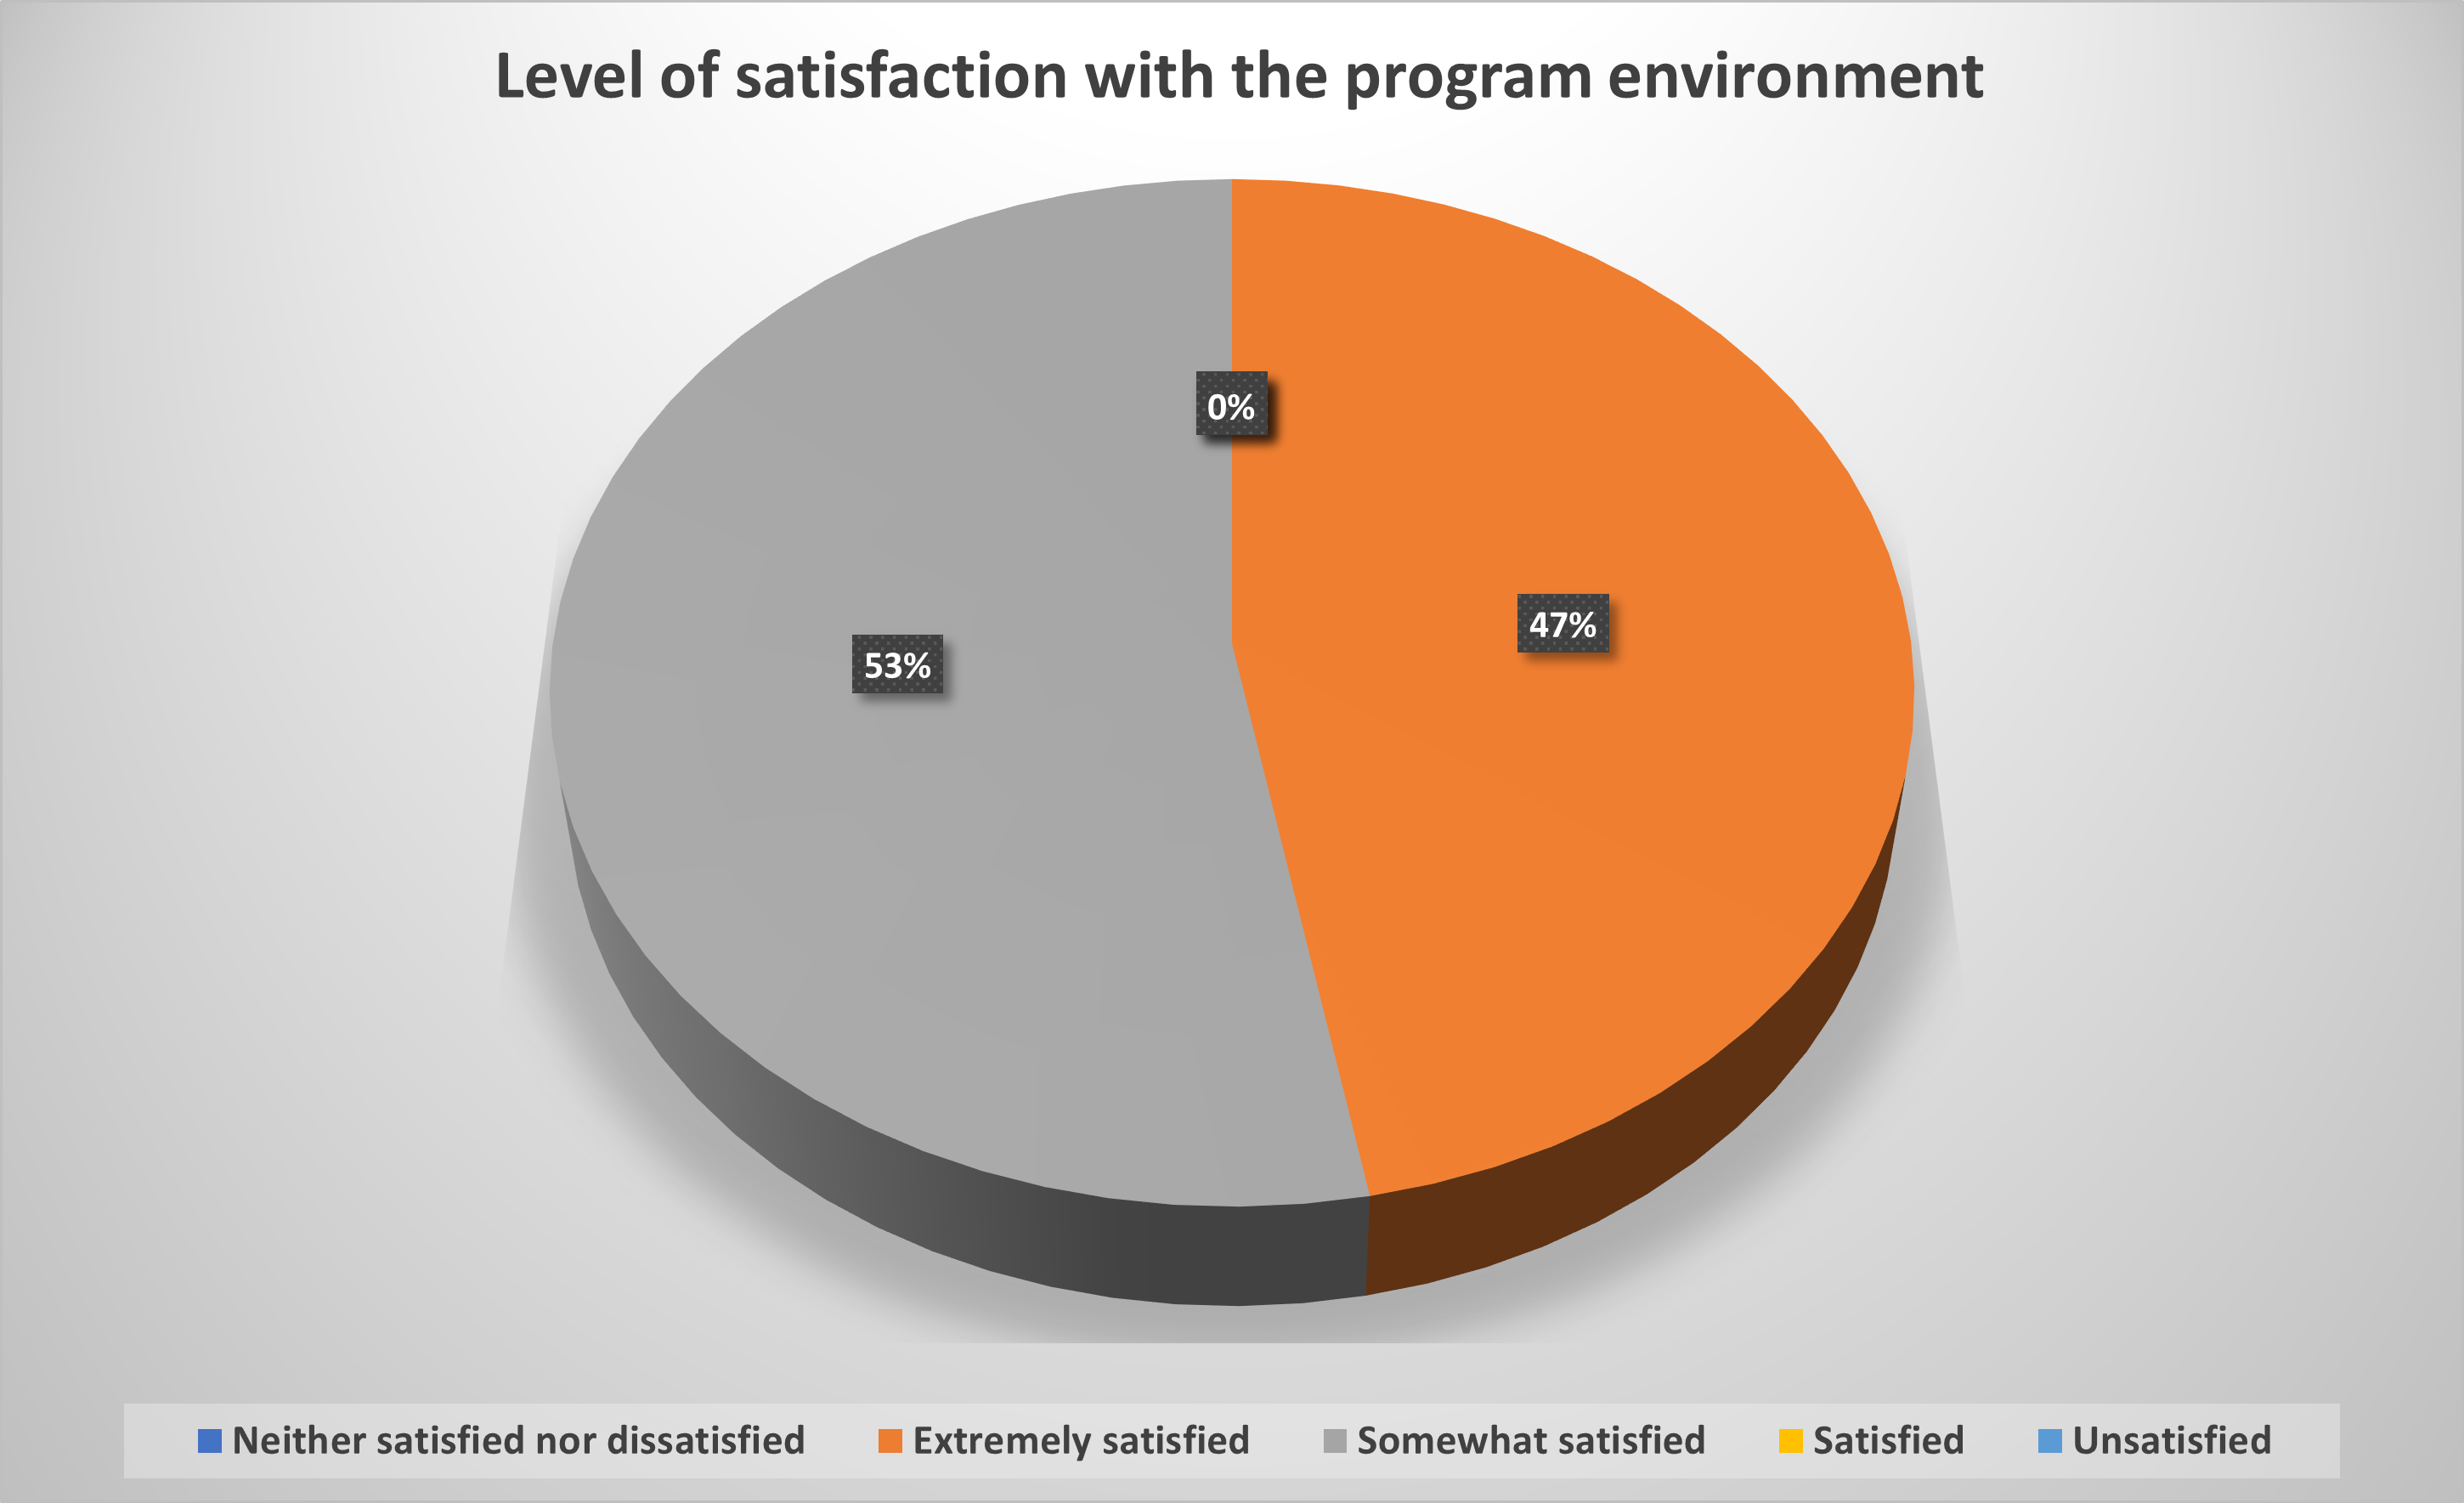 Satisfaction survey with the program environment